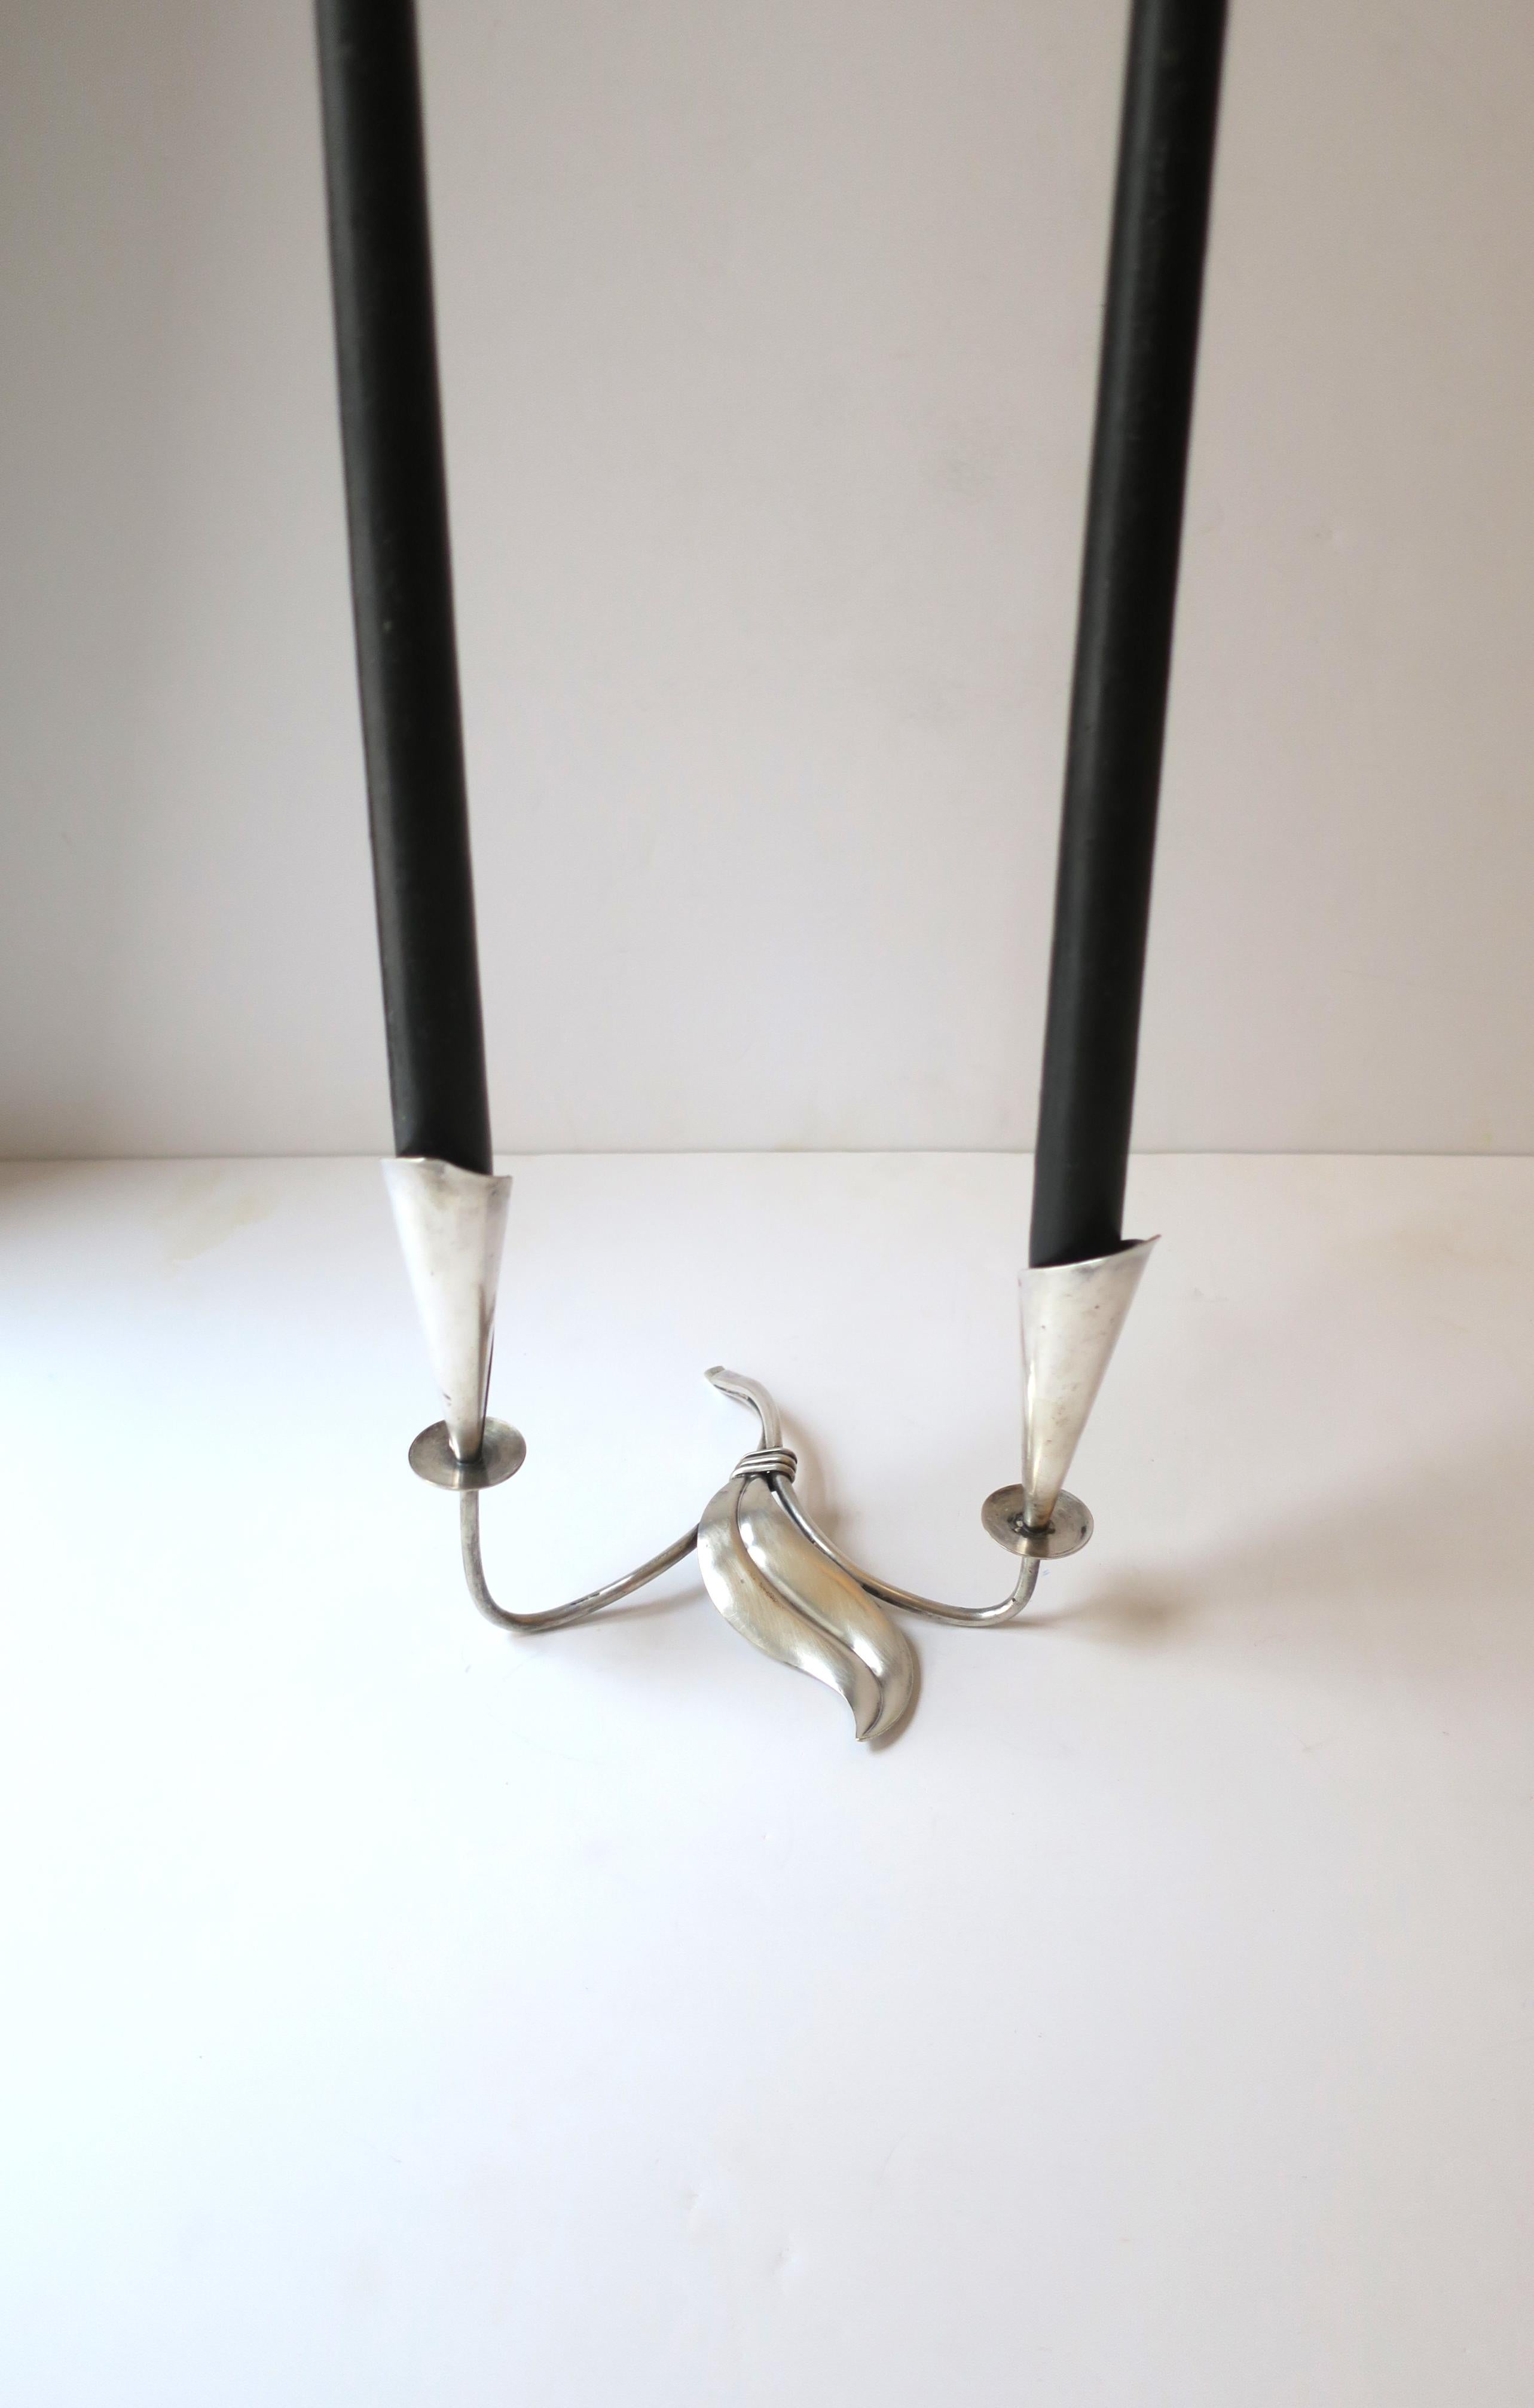 A beautiful Danish / Scandinavian Modern / Organic Modern sterling silver plate candlestick or candelabra holder attributed to designer Hans Jensen, circa mid-20th century, Denmark. Holder has two stems with modern Calla Lilly flower sconces, small